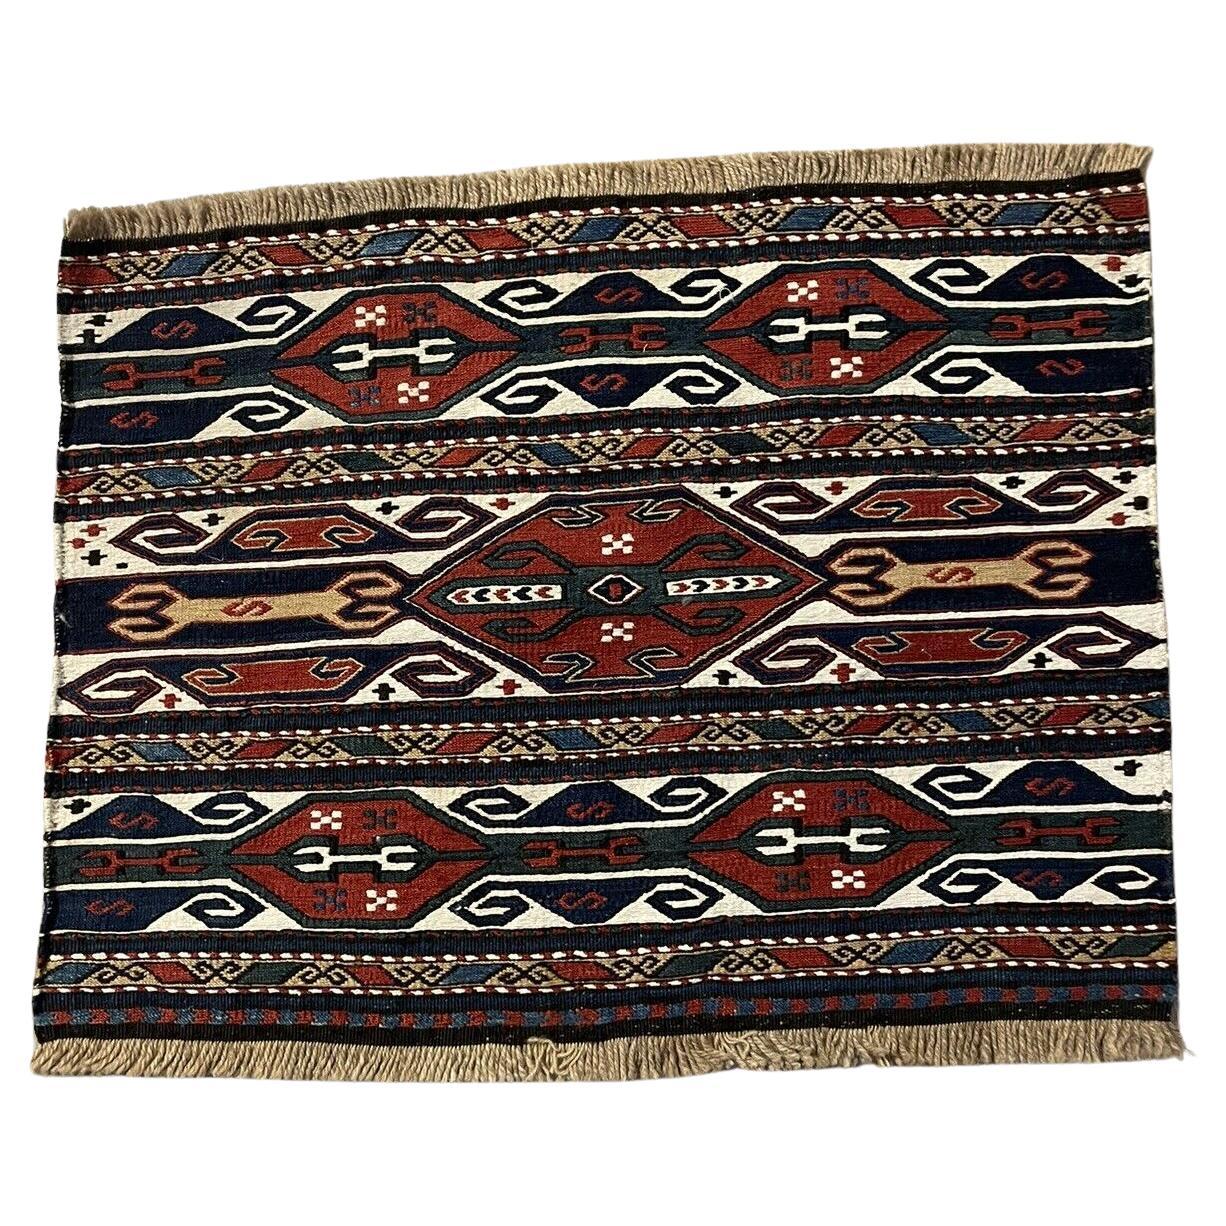 Handmade Antique Persian Style Sumak Collectible Kilim 1.3' x 1.8, 1900s - 1N04 For Sale